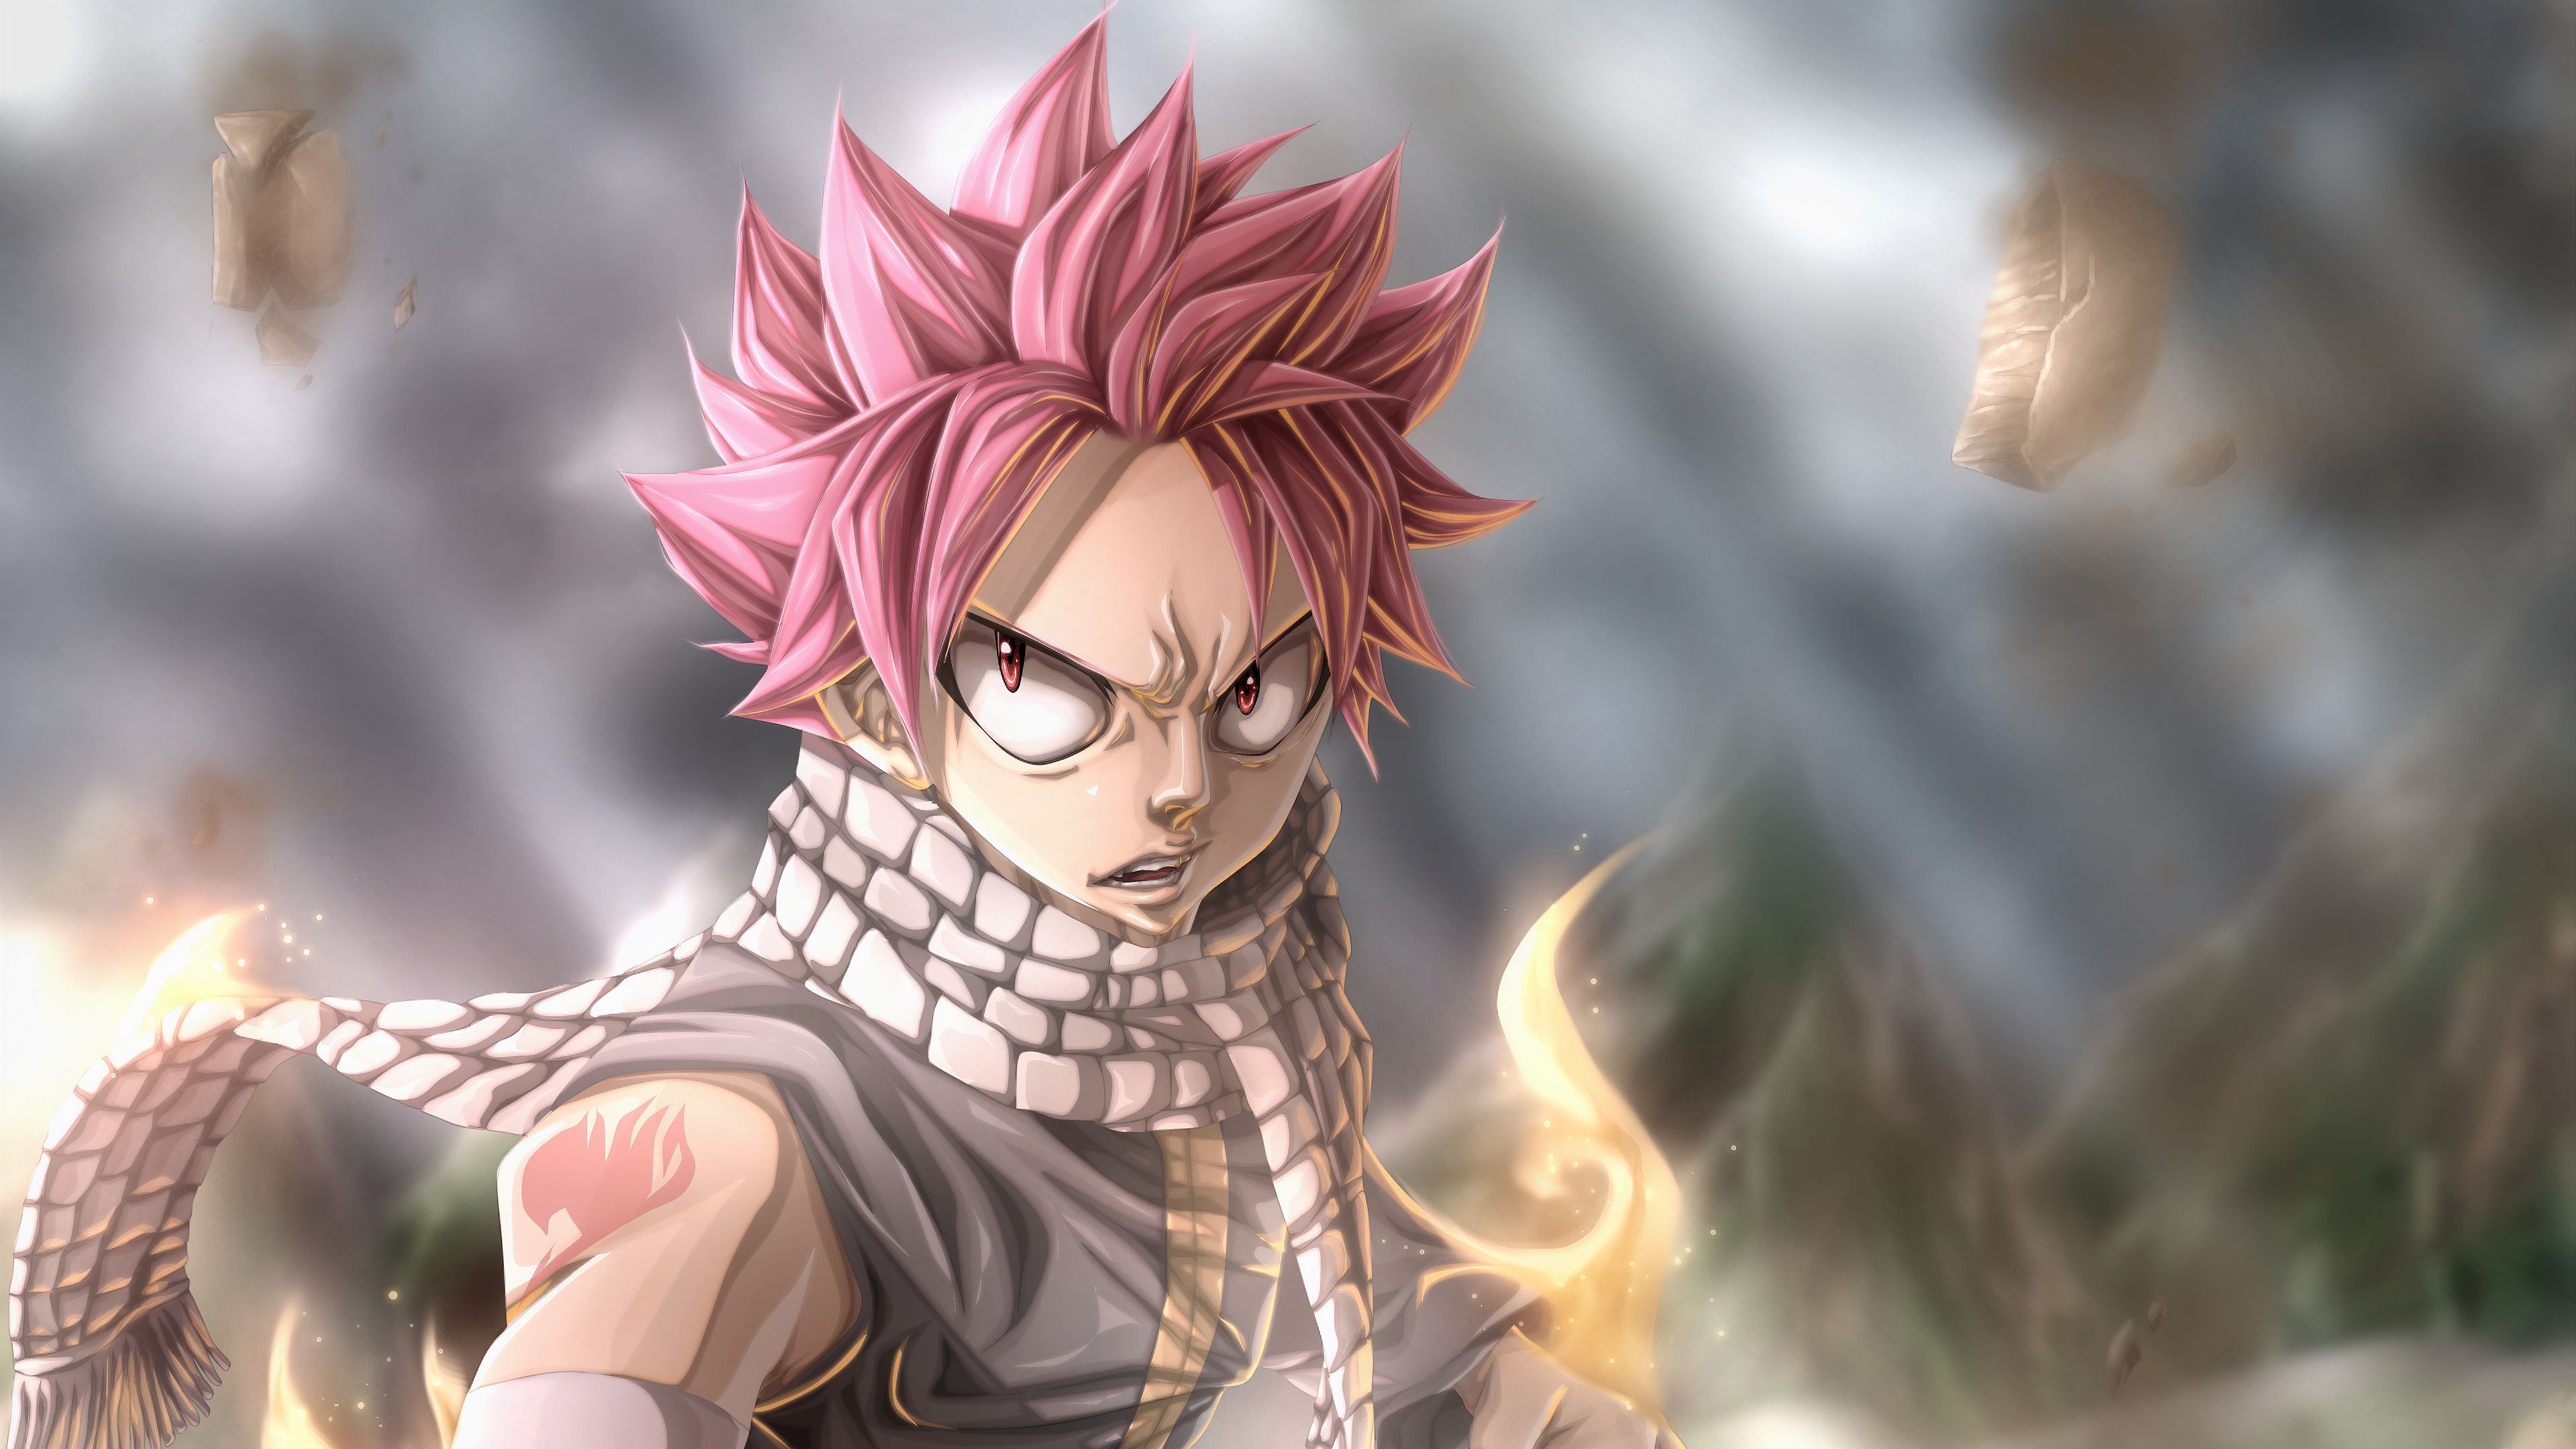 Fairy Tail Anime Wallpaper,HD Anime Wallpapers,4k Wallpapers,Images, Backgrounds,Photos and Pictures